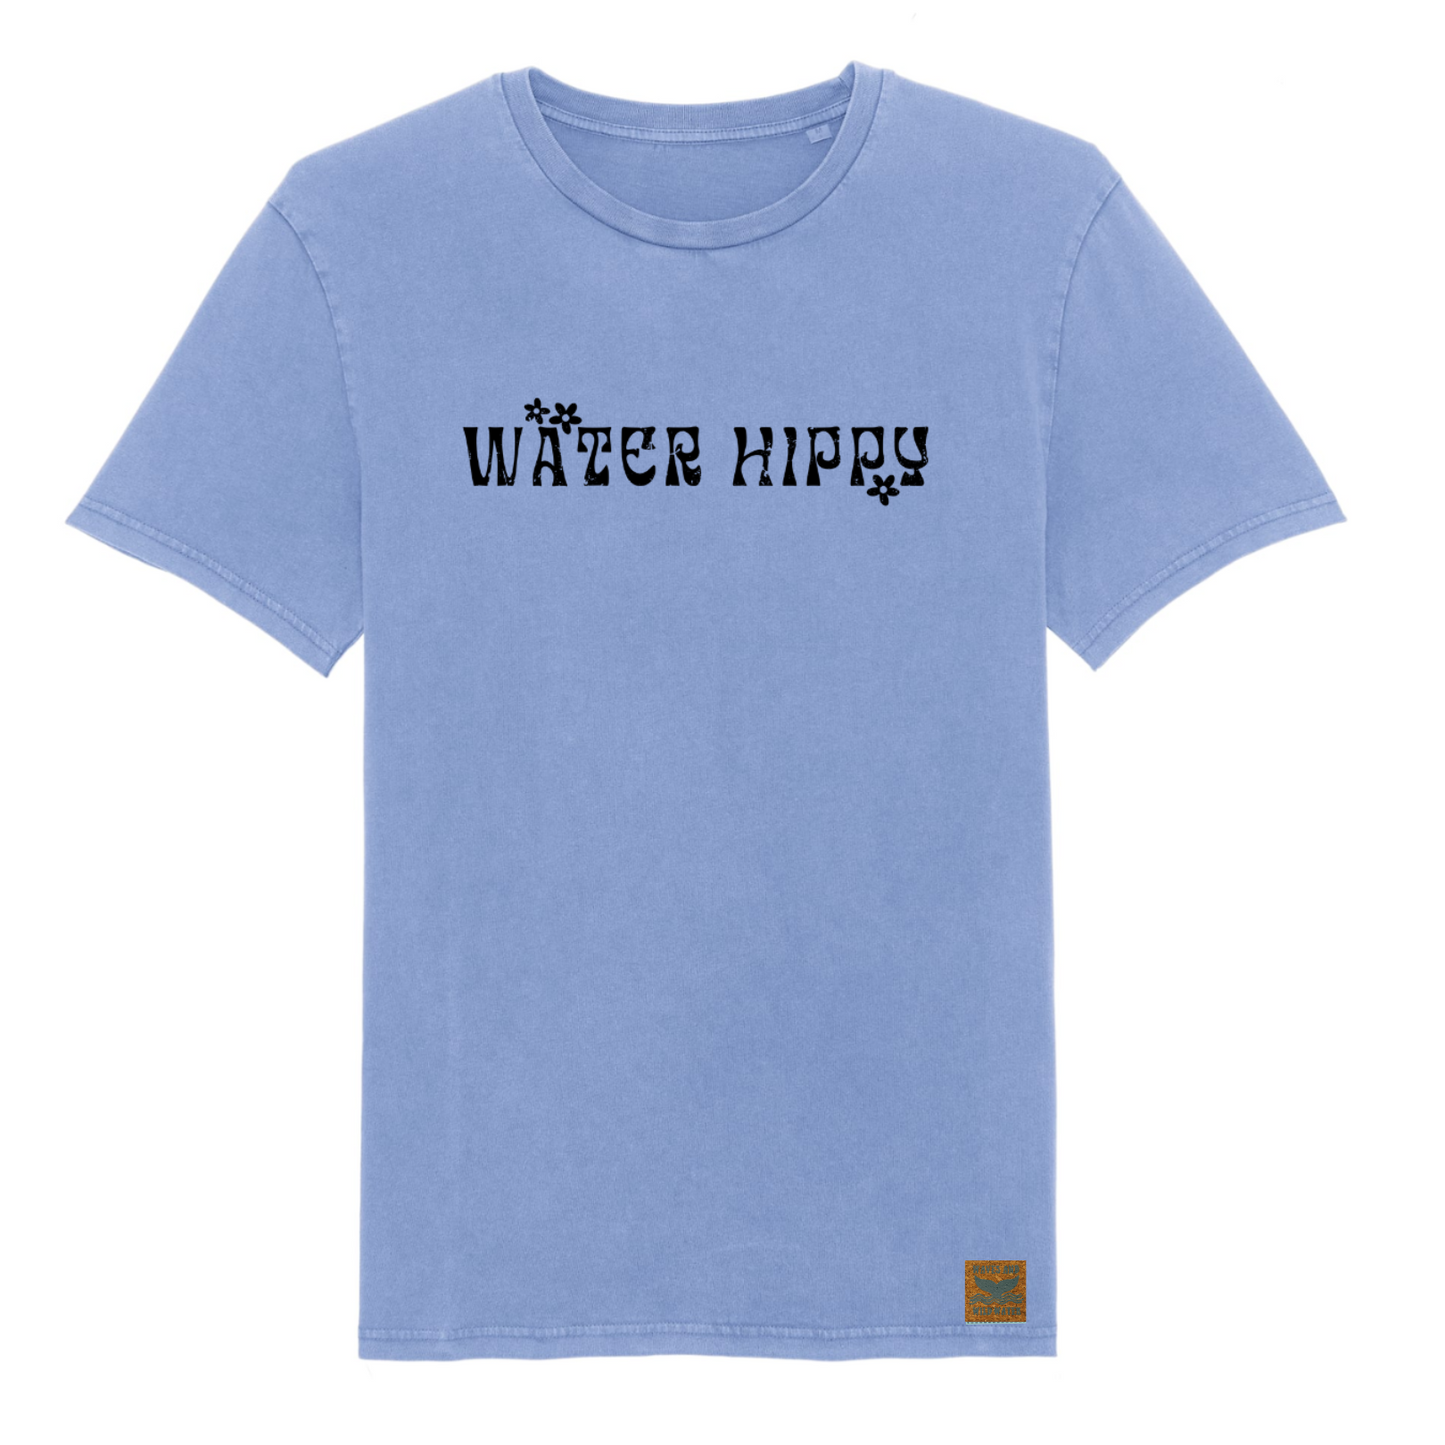 A vintage blue t-shirt with the words 'Water hippy' printed in black across the front.